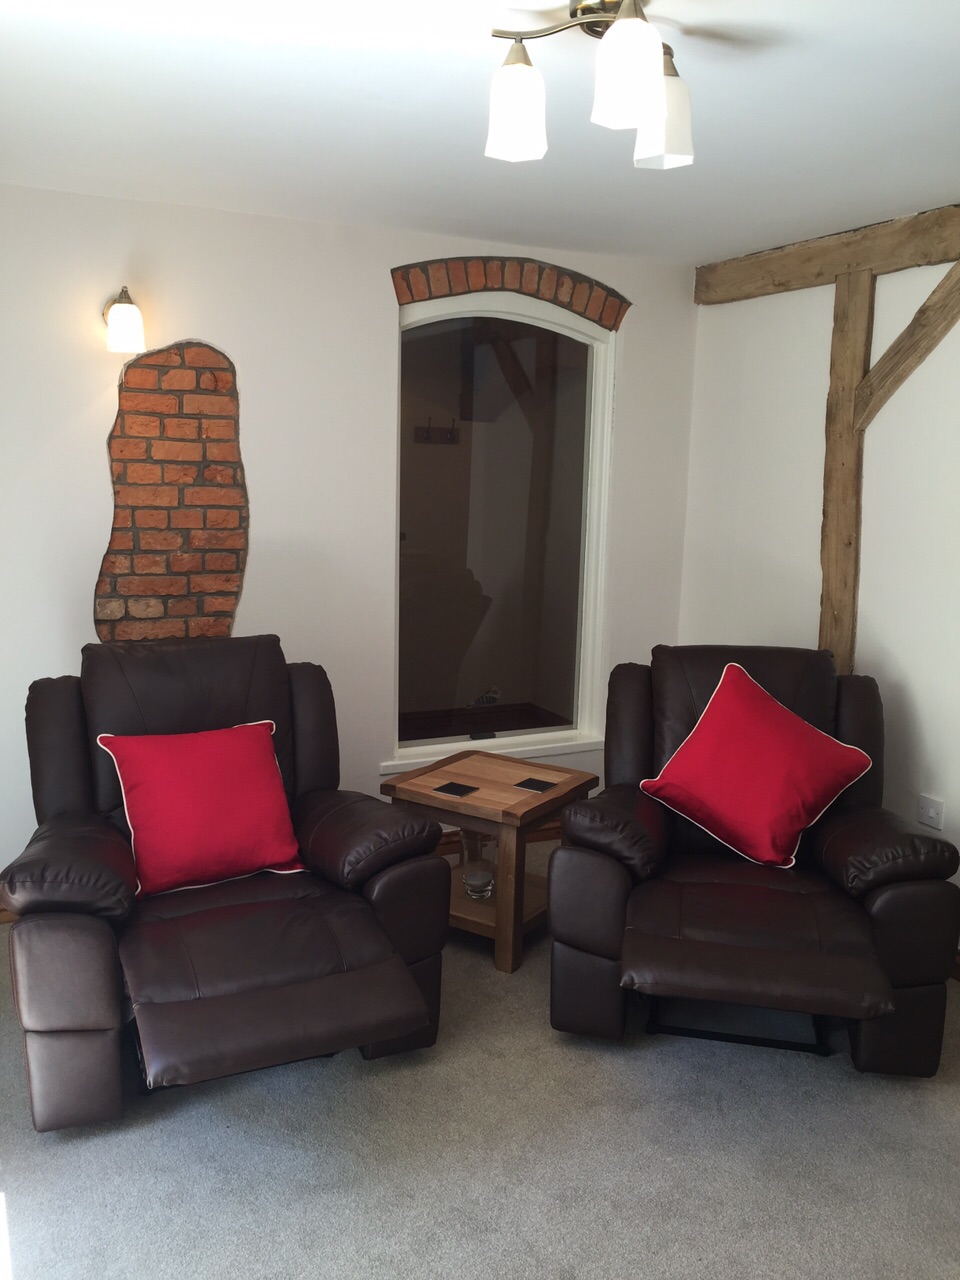 Leather recliners next to open brick feature and wooden beam